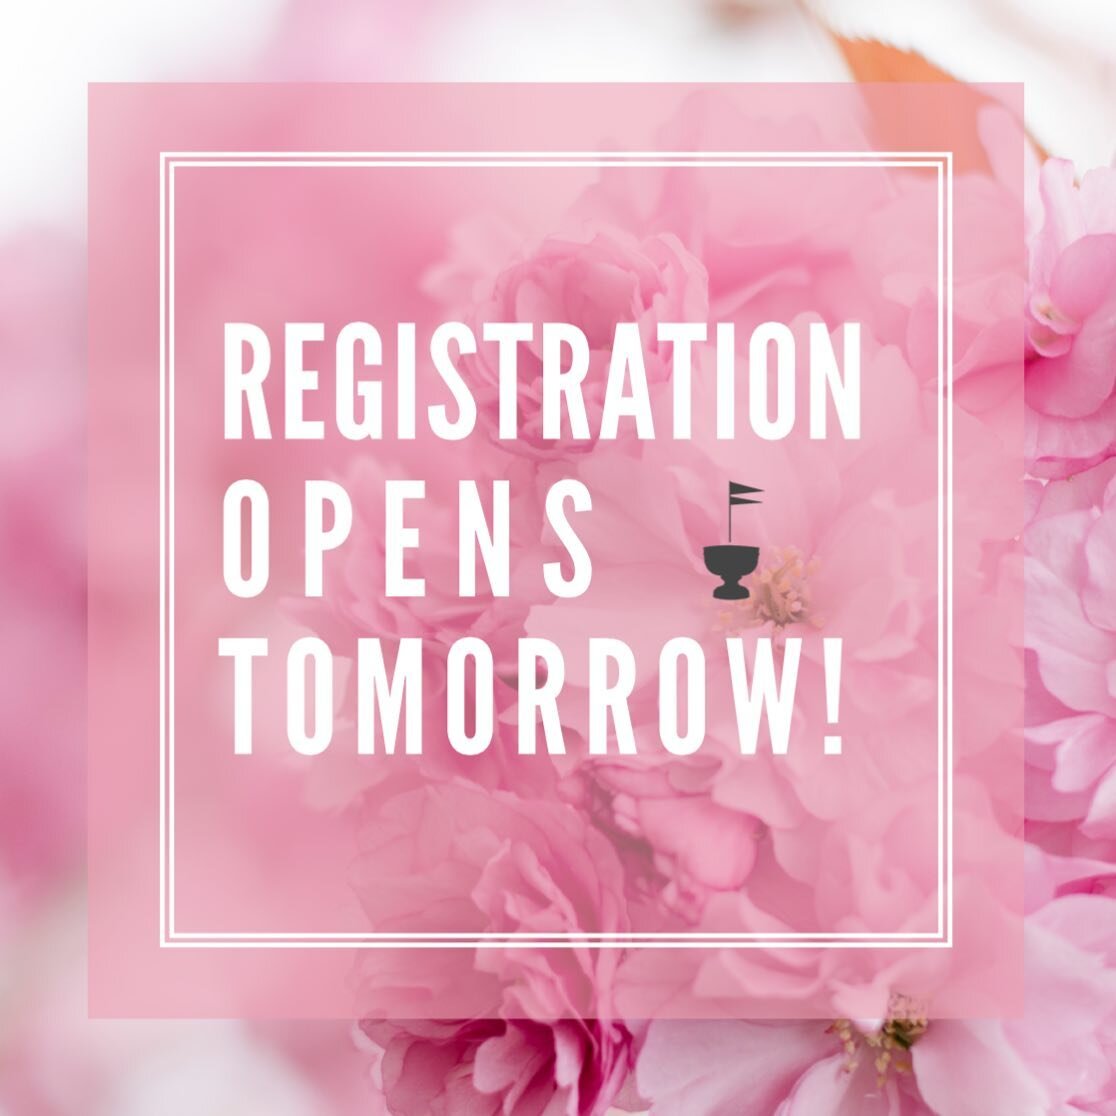 🌸 Can you believe it&rsquo;s already that time! 

👉🏻 Registration opens TOMORROW, May 17th at 9:00am EST. 

Head over to www.ackgardenfestival.org to see our list of events!